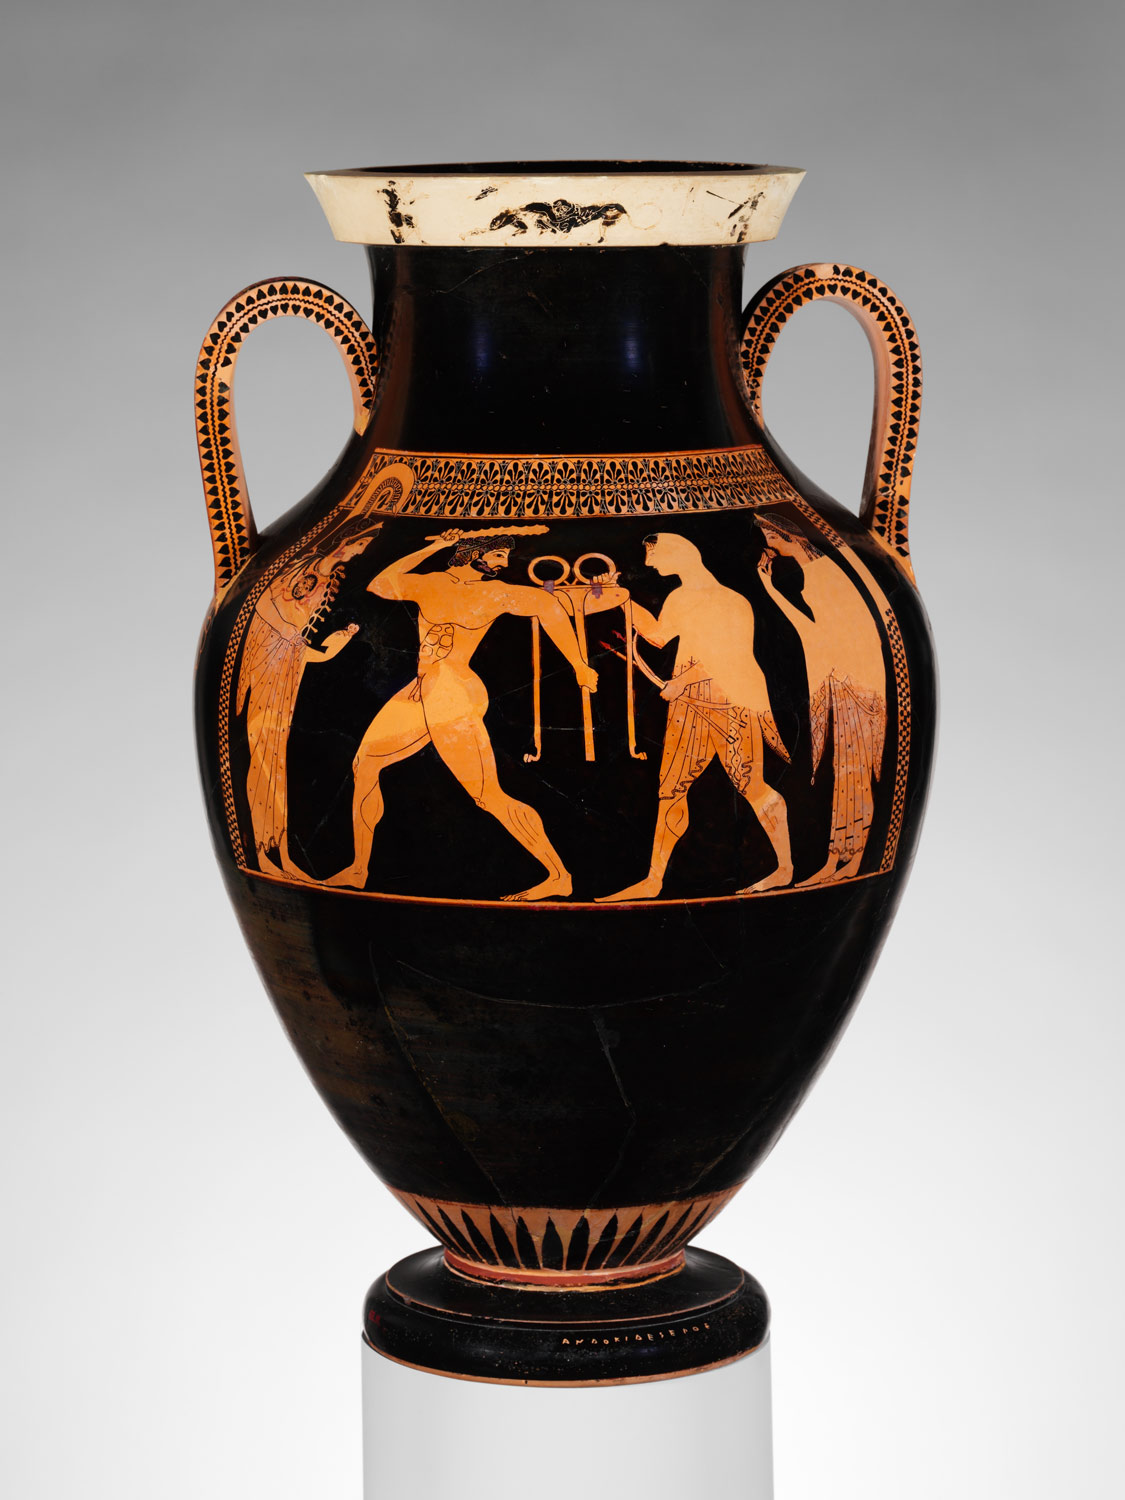 Terracotta amphora (jar) | Signed by Andokides as potter, attributed to